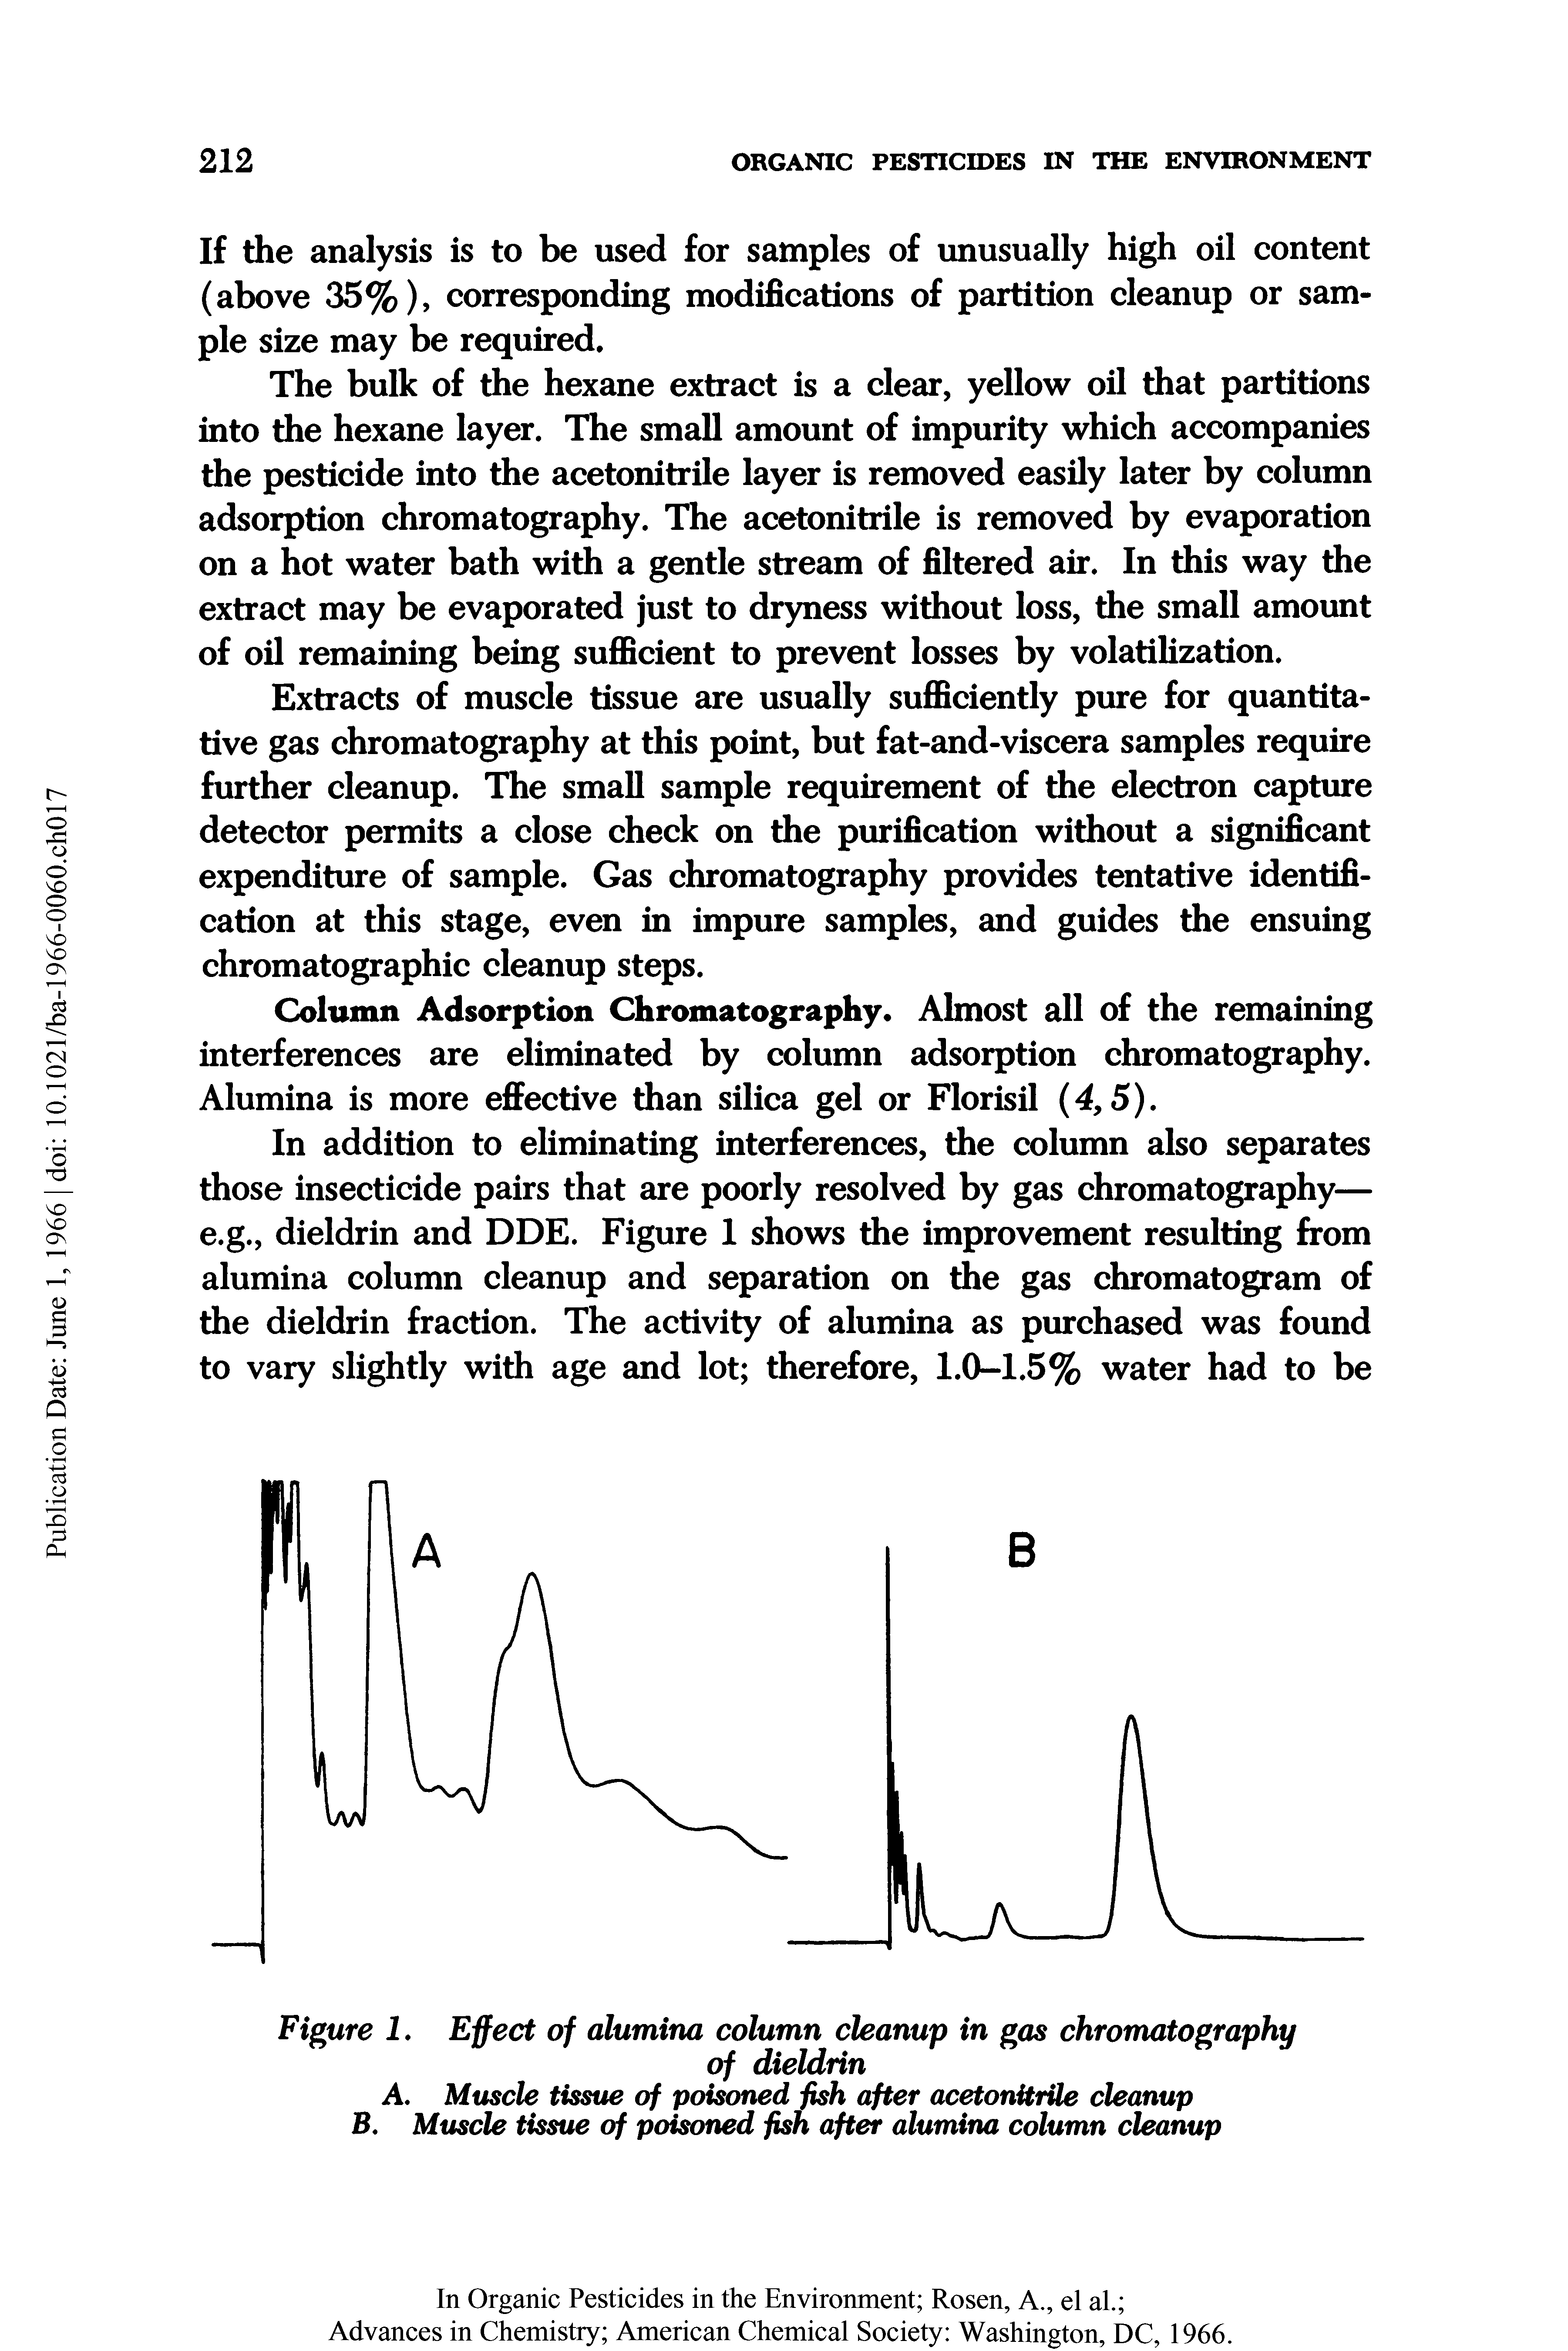 Figure 1. Effect of alumina column cleanup in gas chromatography...